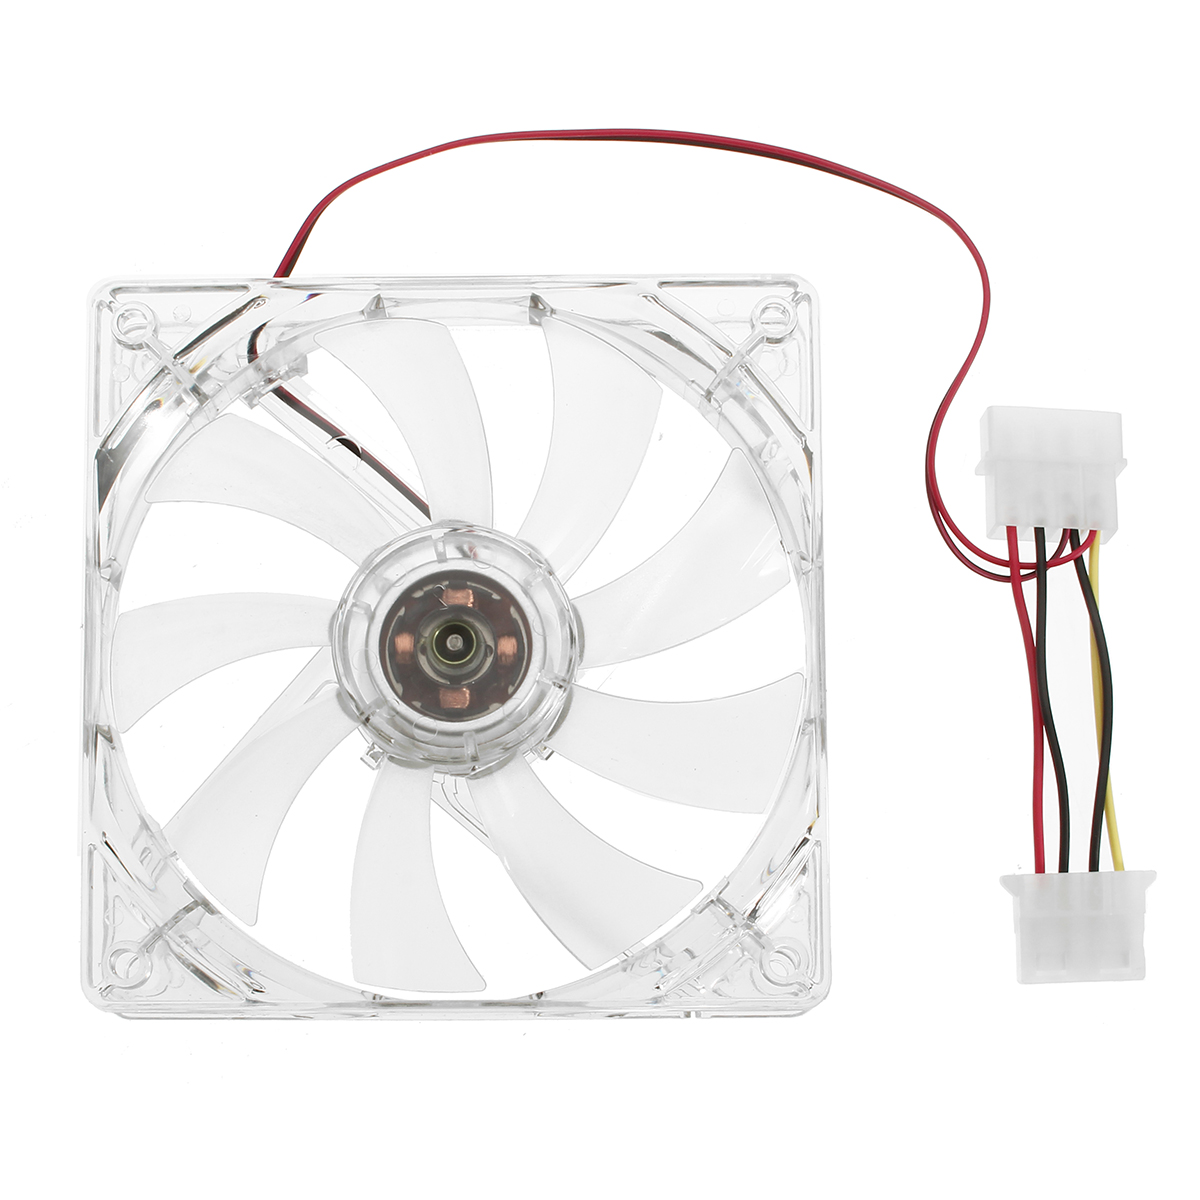 Find 12V DC 4Pin 4 LED Light 120x120x25mm 1100PRM PC Computer Case CPU Cooling Fan for Sale on Gipsybee.com with cryptocurrencies